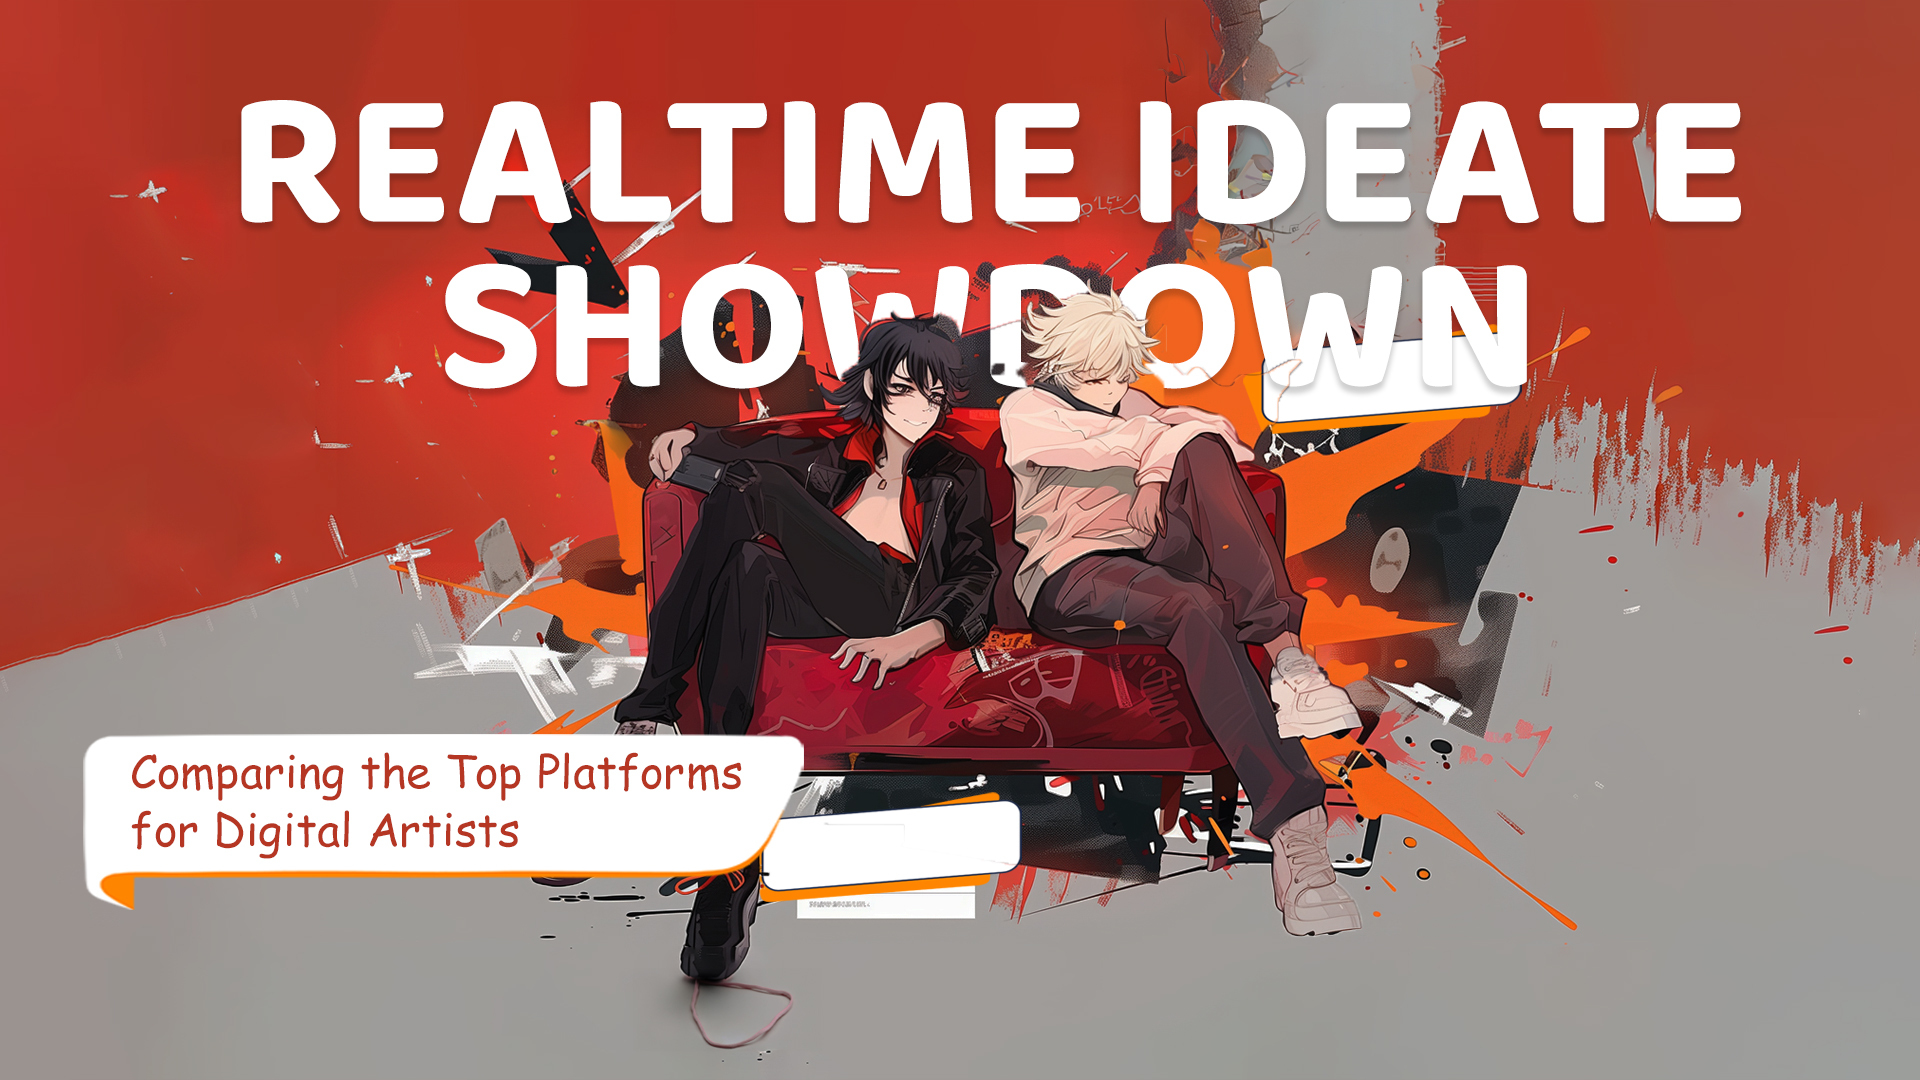 Ideate Showdown: Comparing the Top Platforms for Digital Artists